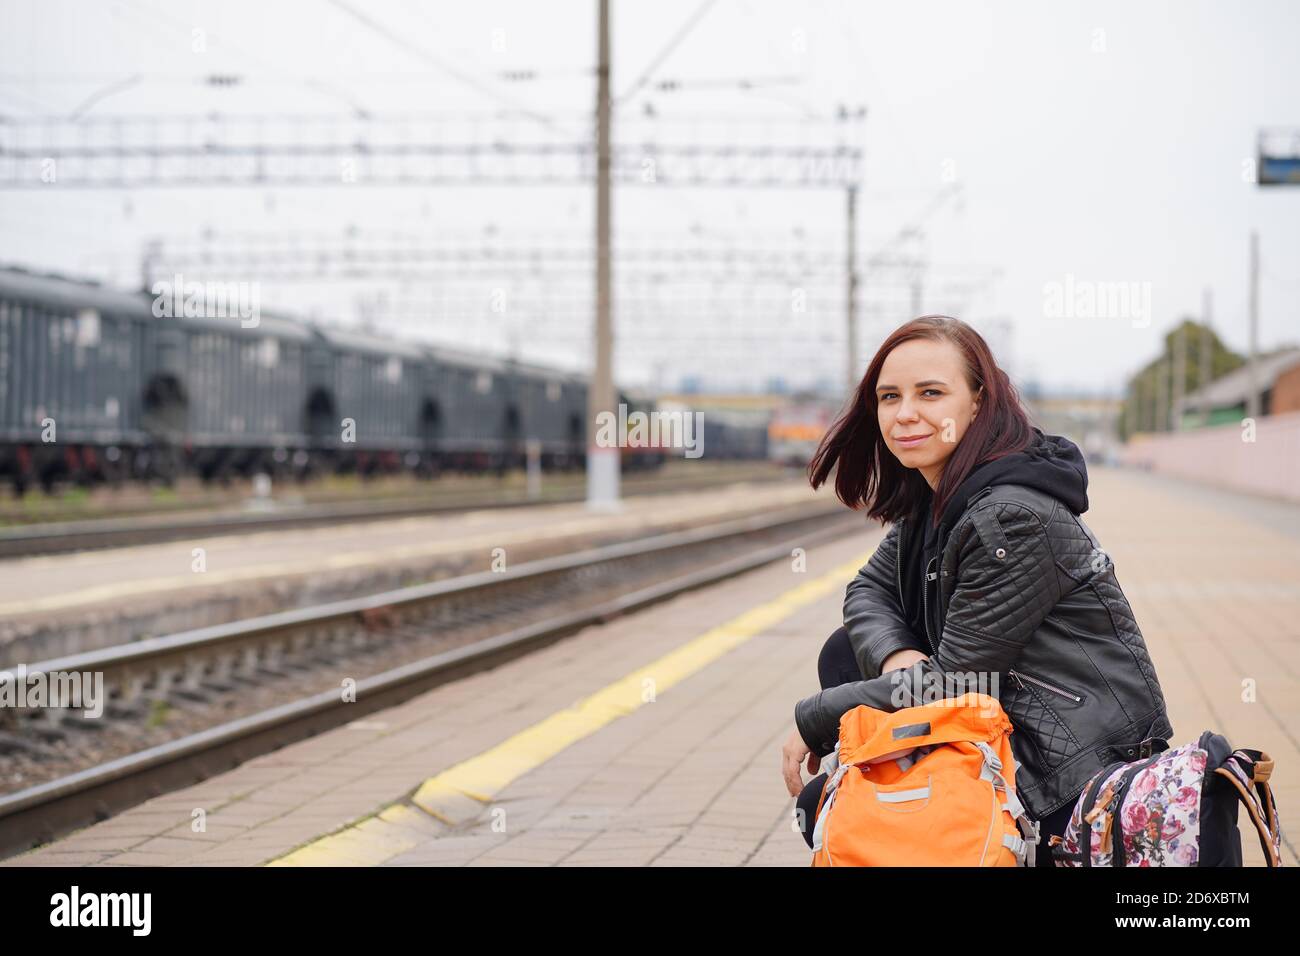 Young woman squats on platform, waiting for train. Female passenger with backpacks sitting on railroad platform in waiting for train ride. Stock Photo